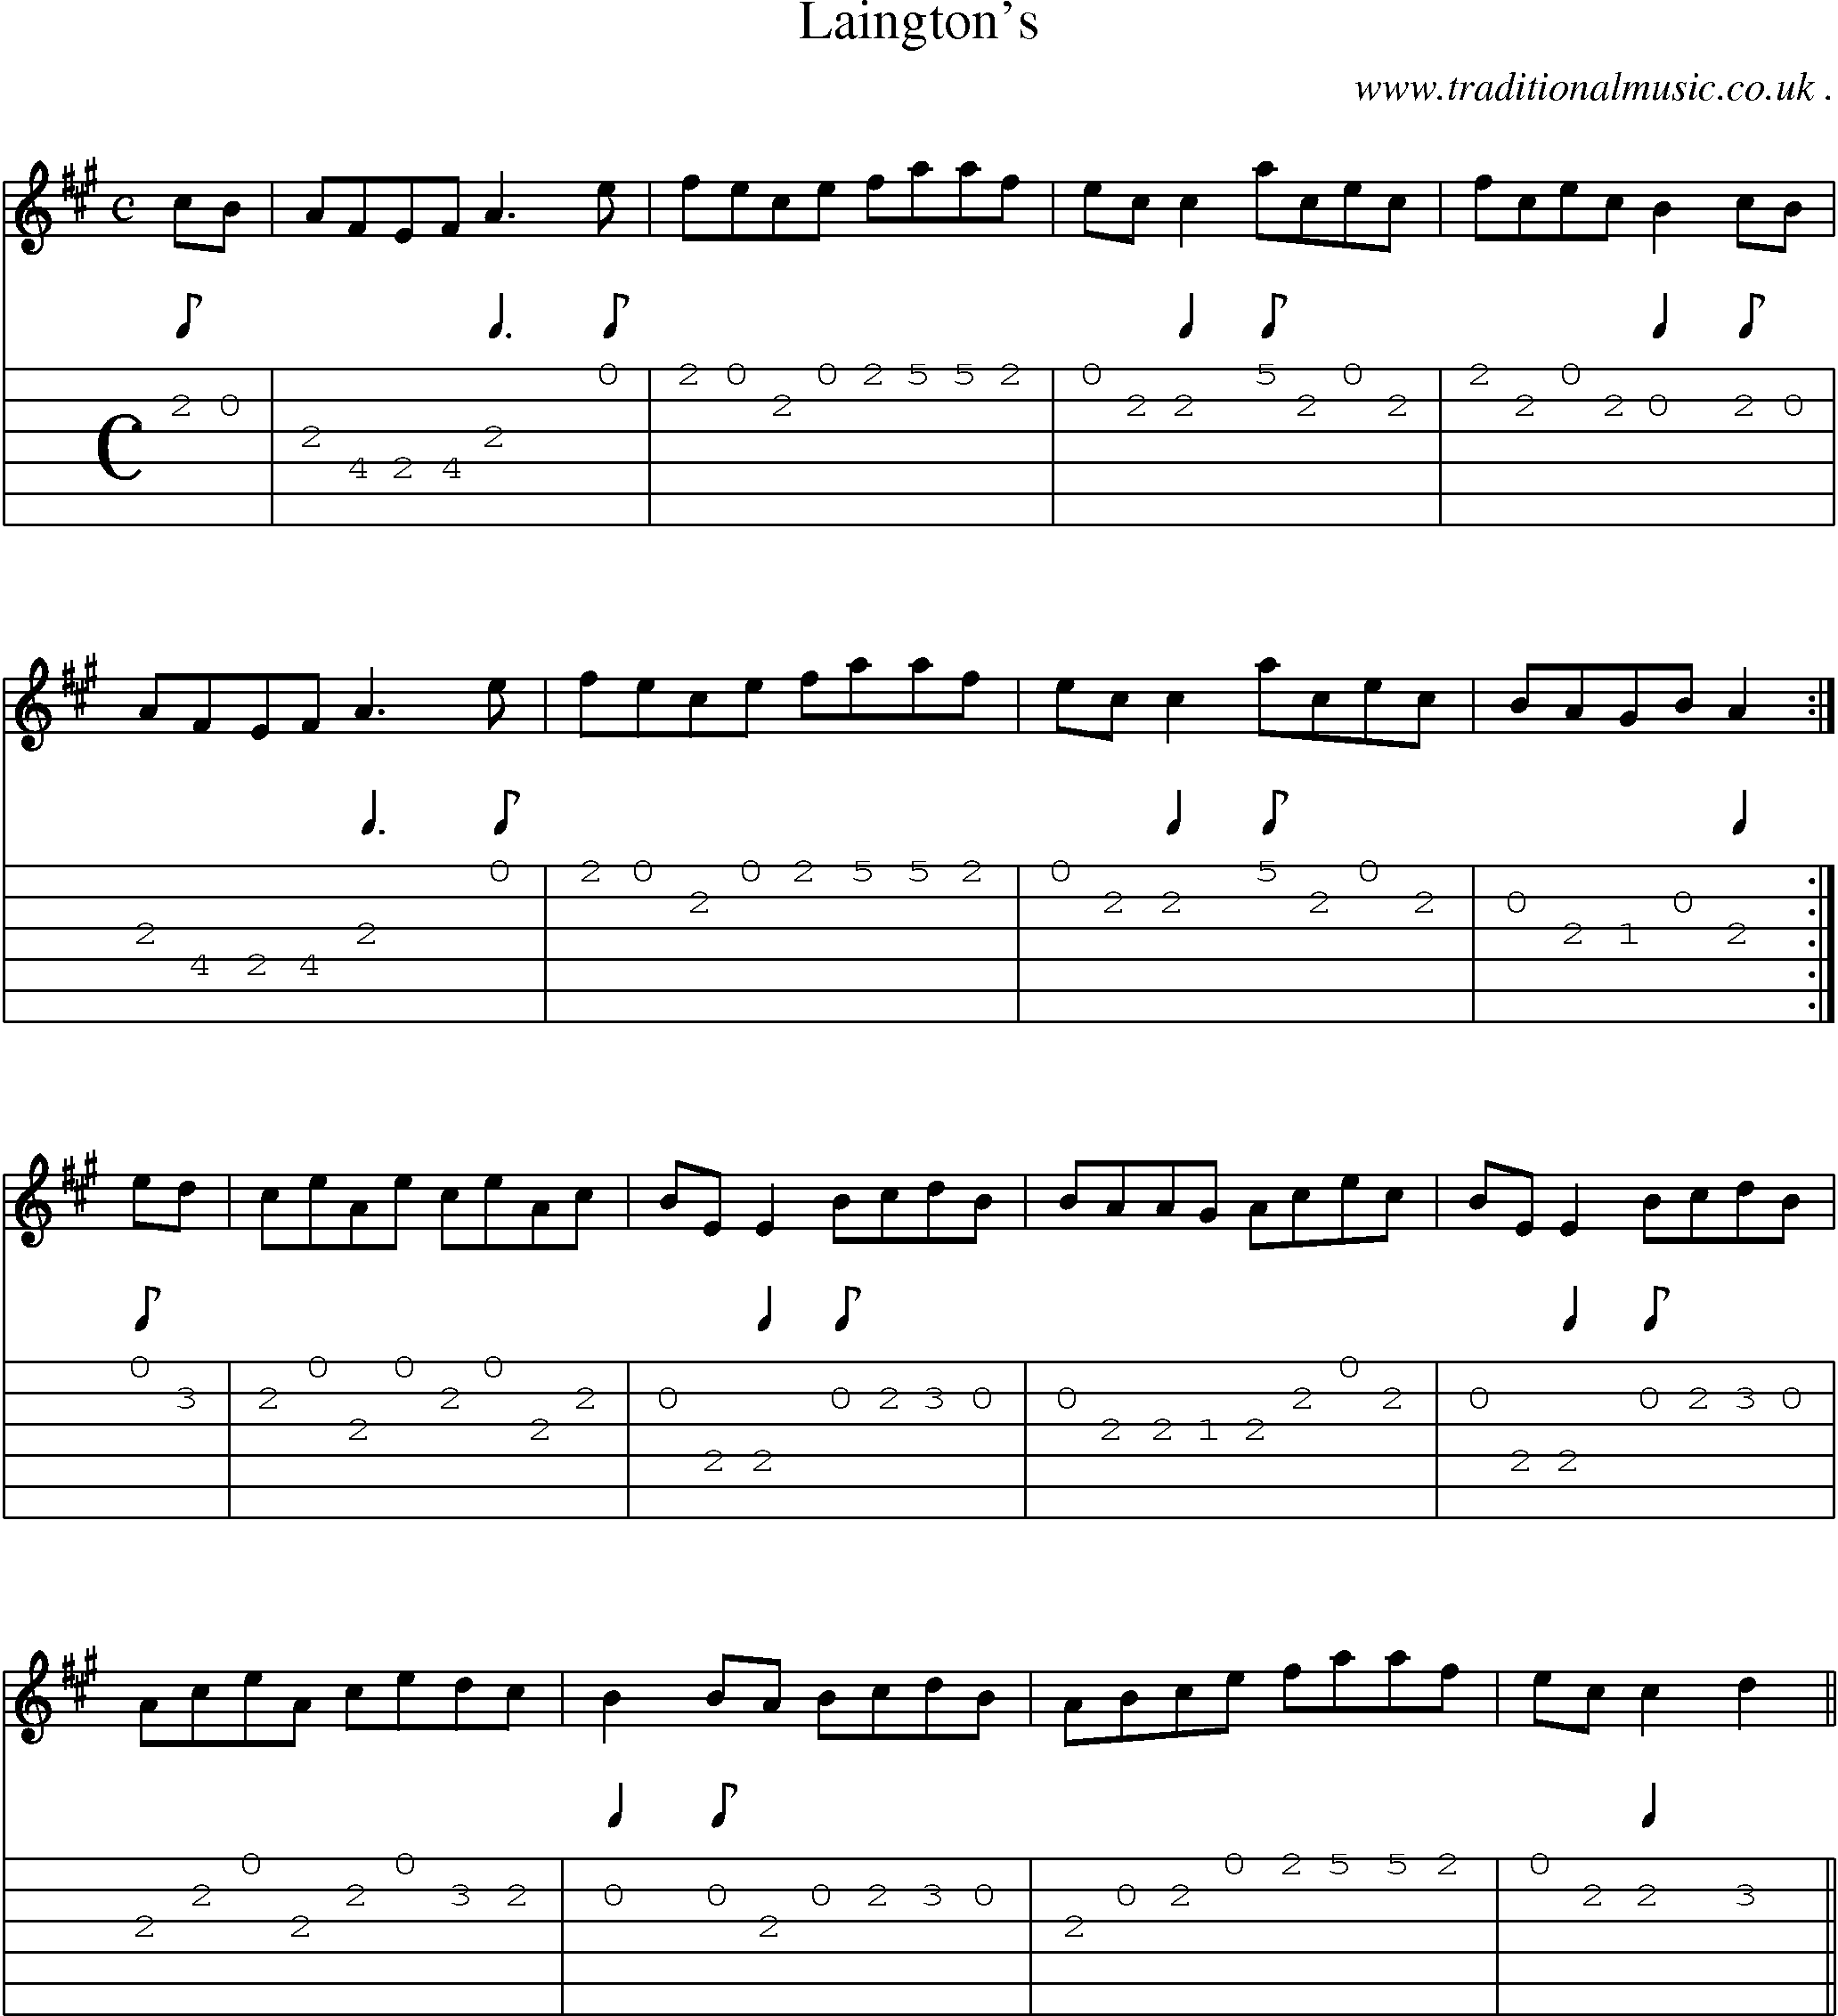 Sheet-Music and Guitar Tabs for Laingtons